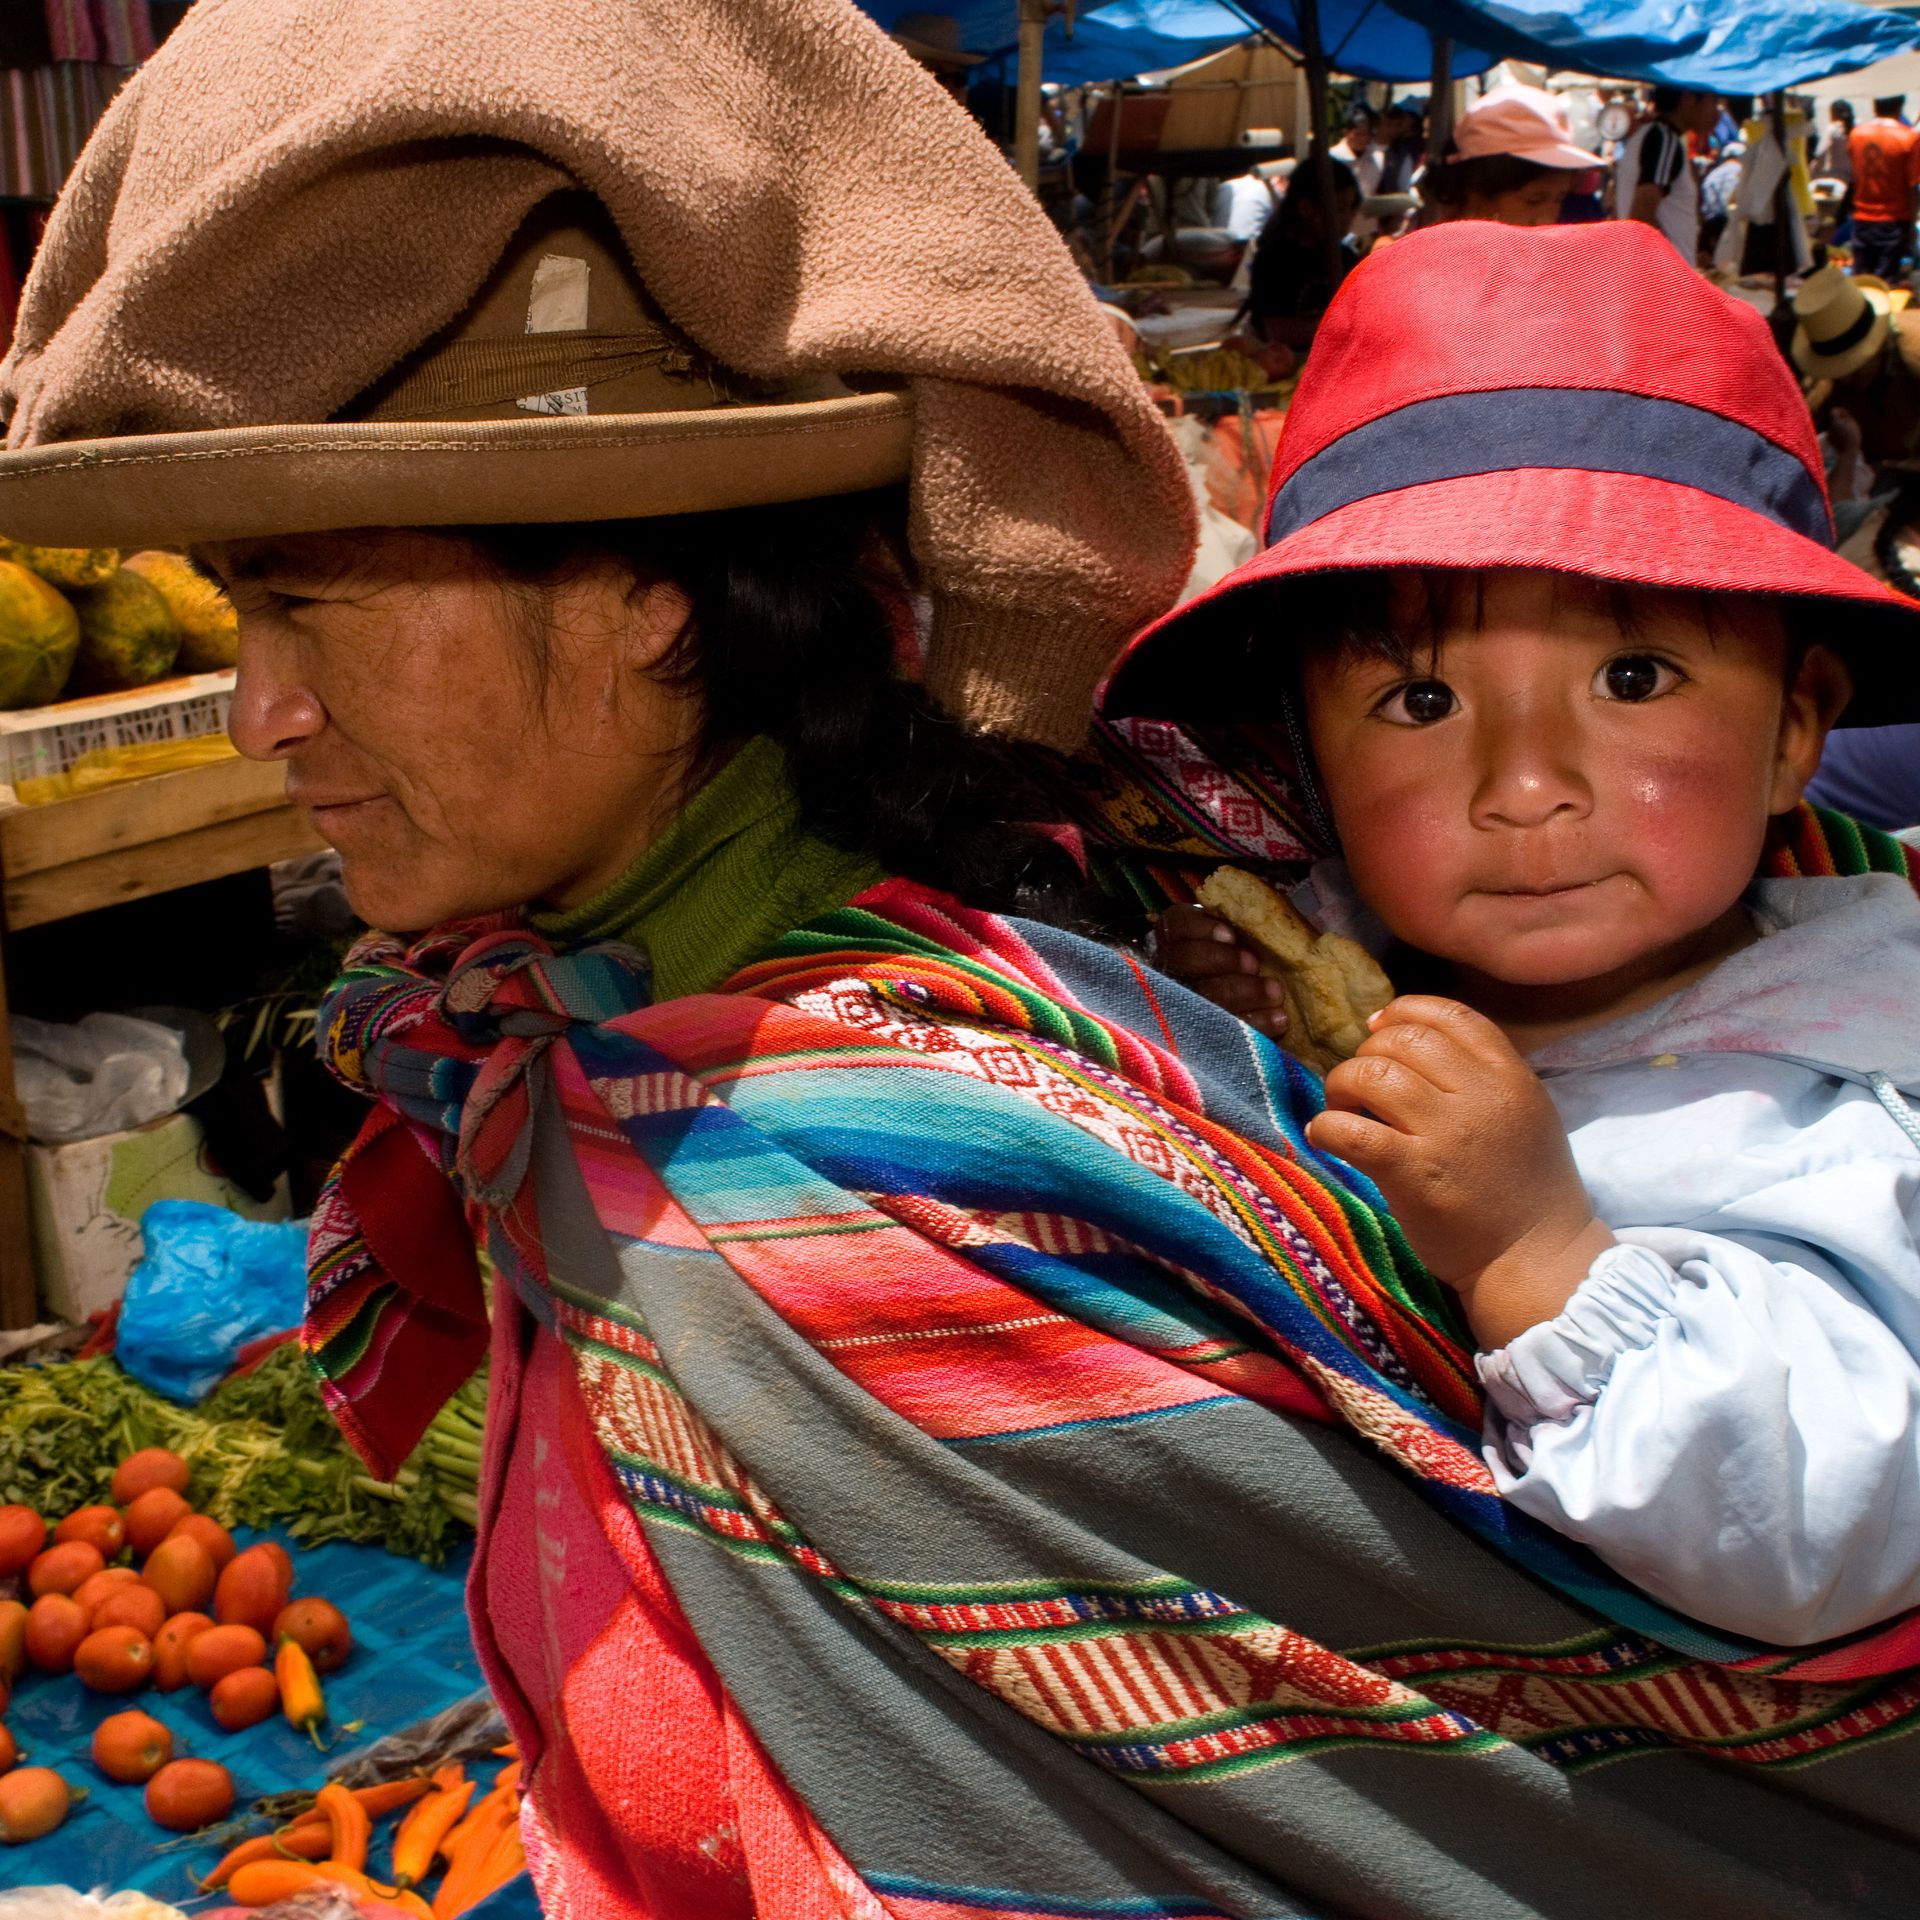 A mother and her son dressed in a traditional costume in Pisac Sunday market day. Pisac. Sacred Valley.